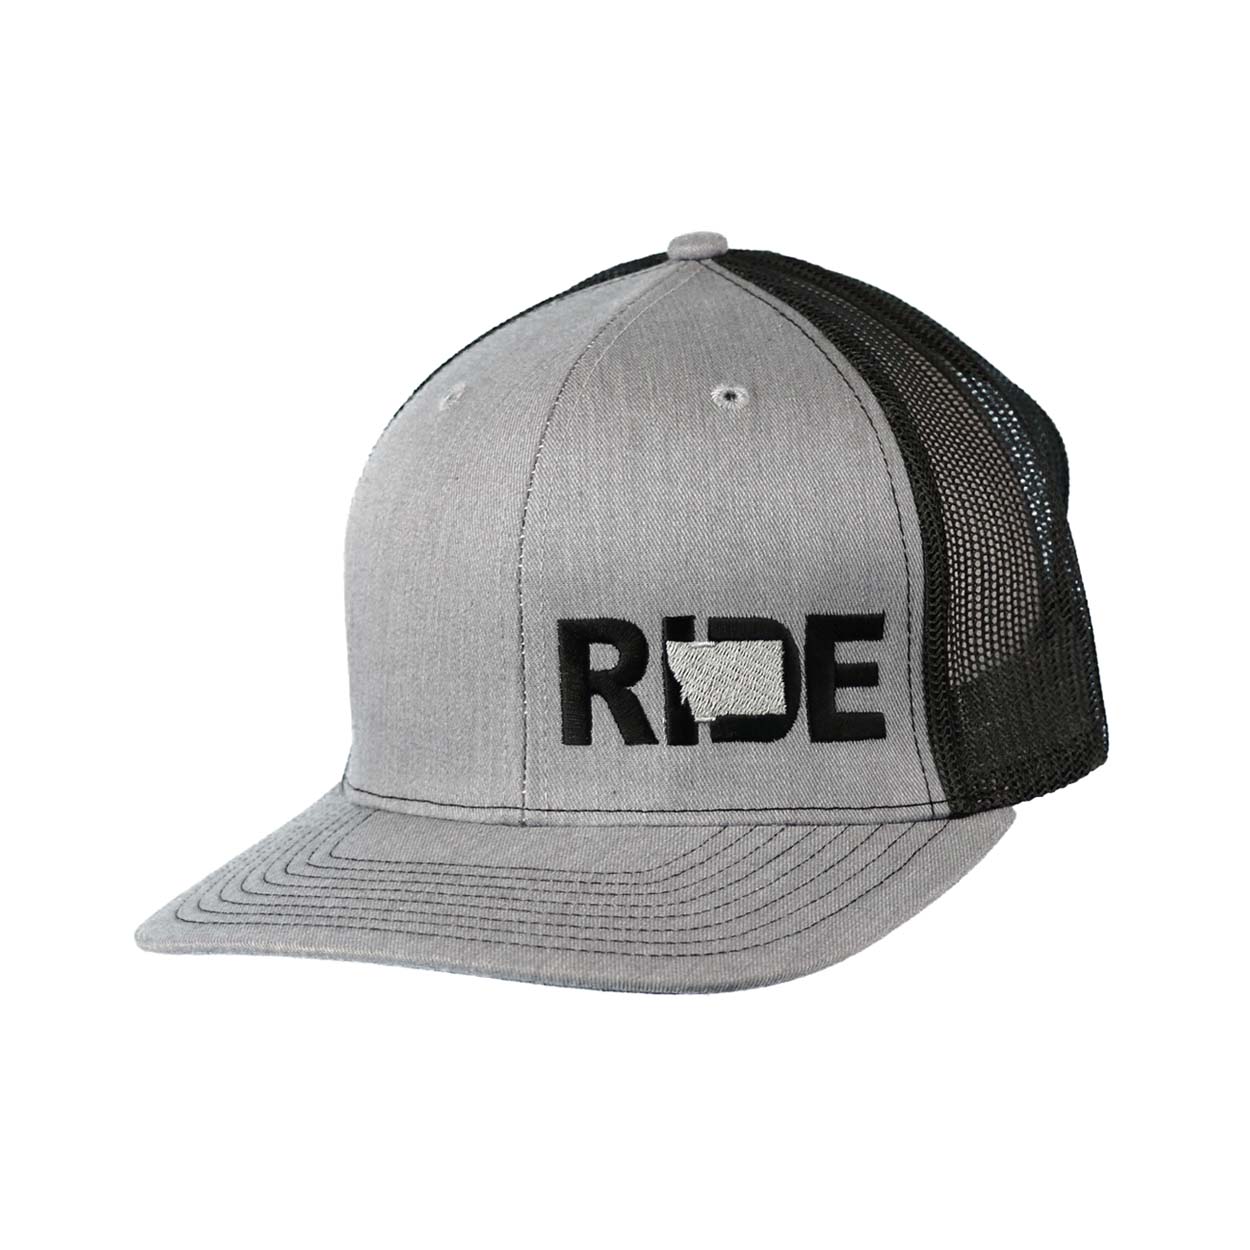 Ride Montana Night Out Pro Embroidered Snapback Trucker Hat Heather Gray/Black